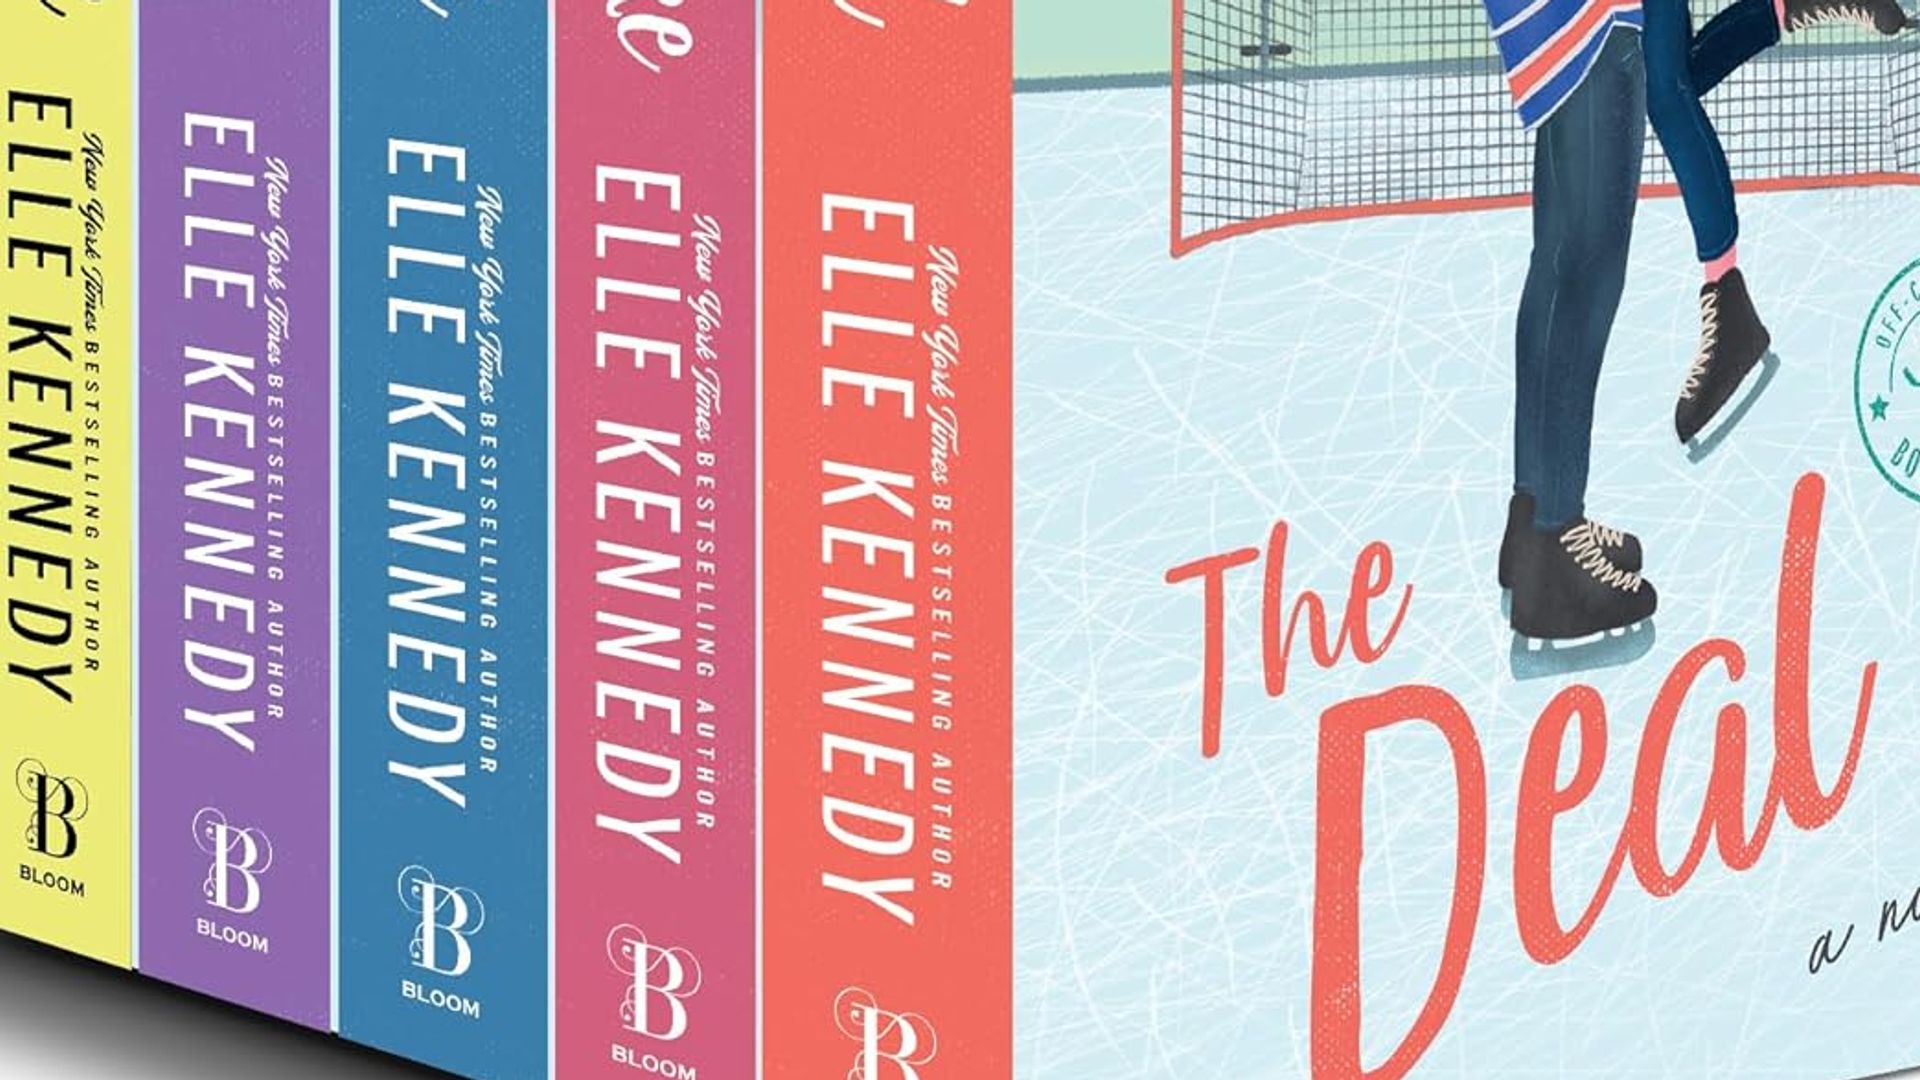 Five Off Campus books by Elle Kennedy lined up next to each other